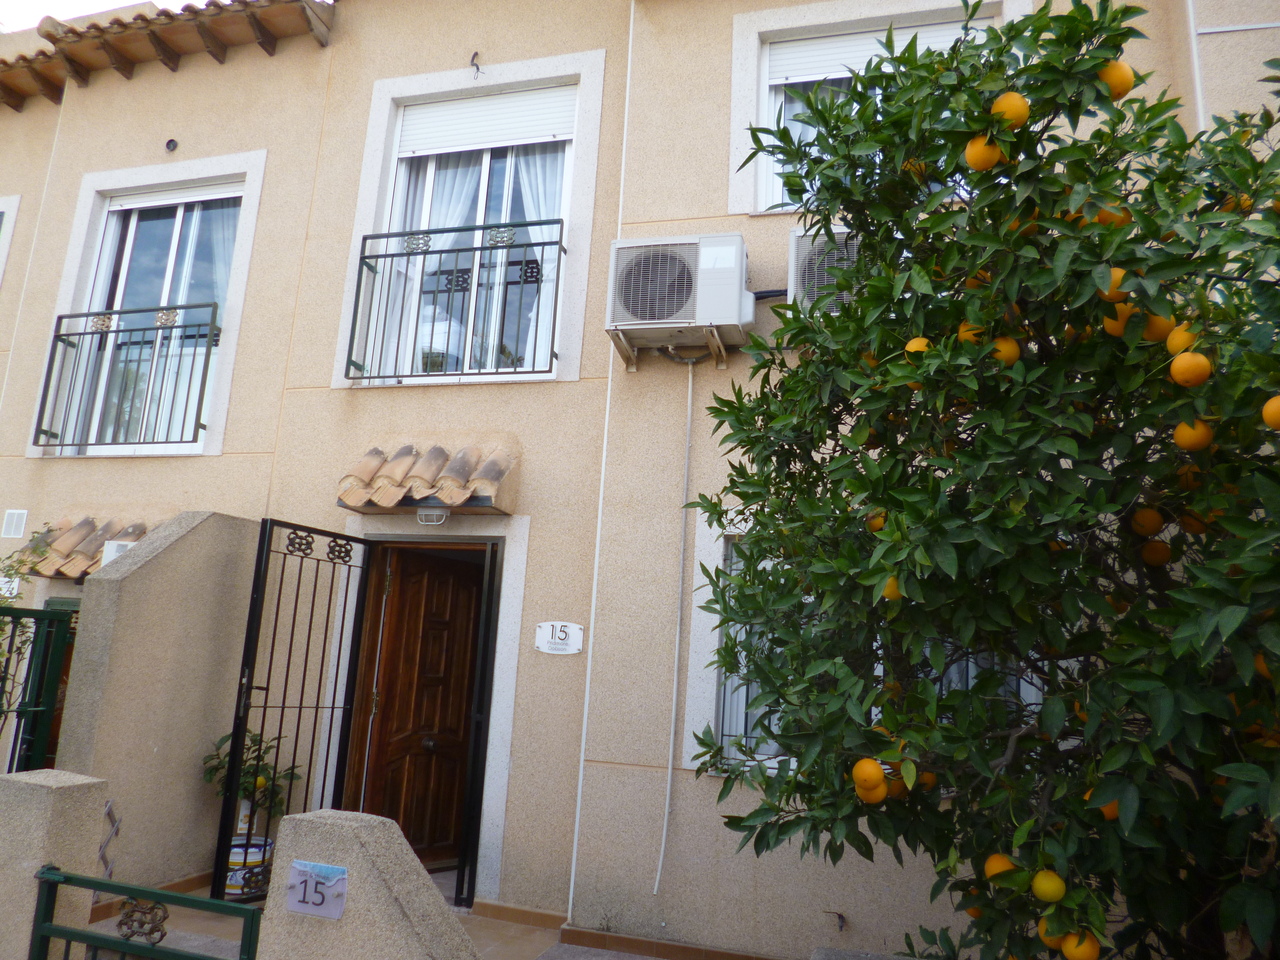 F2038: Town house for sale in Villamartin